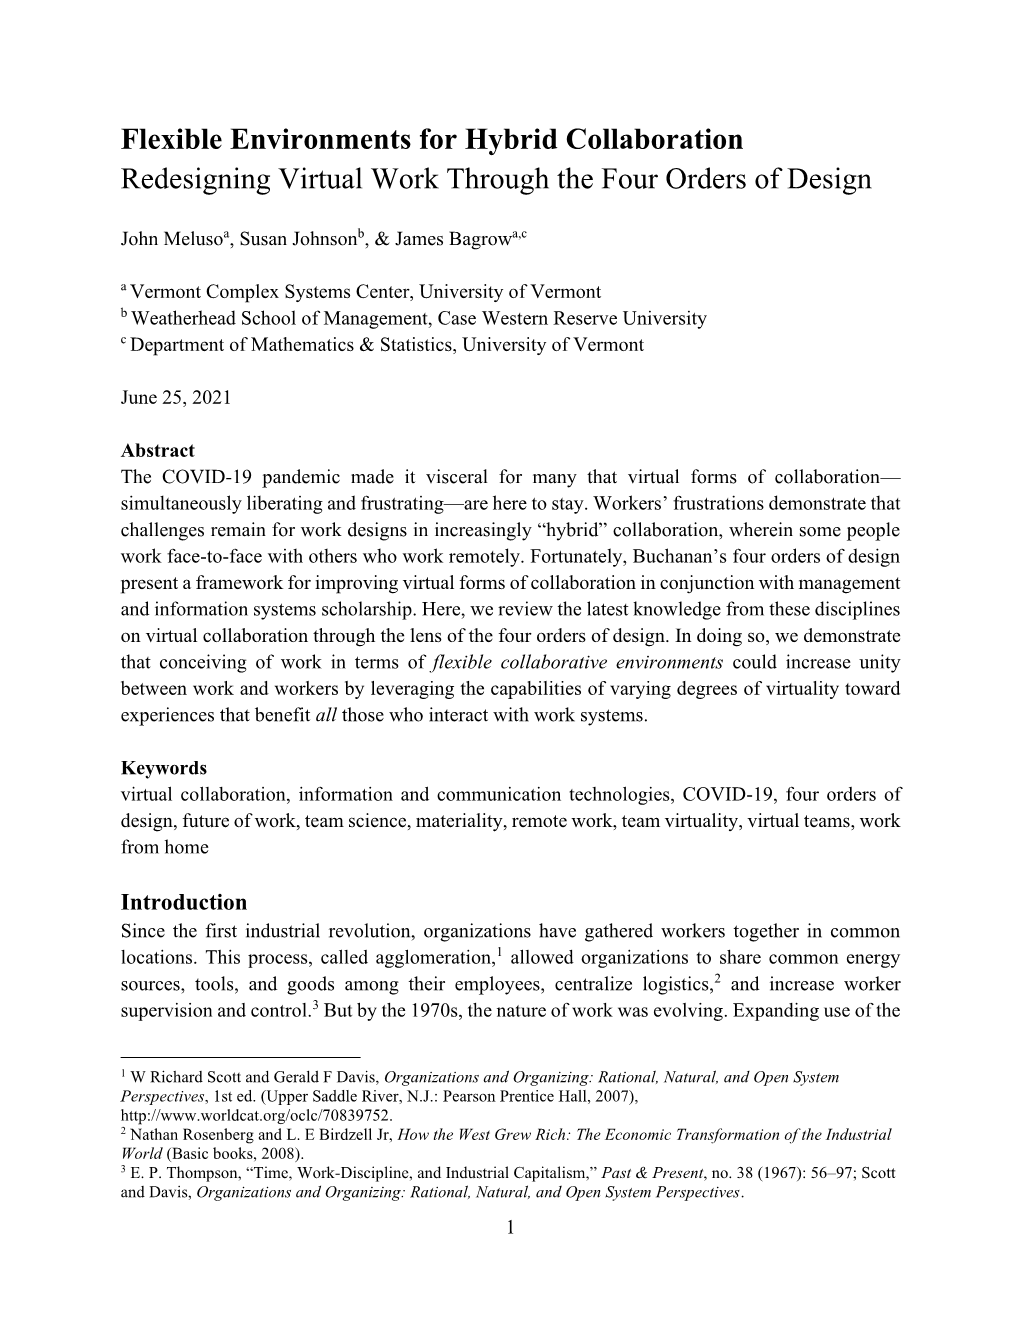 Redesigning Virtual Work Through the Four Orders of Design